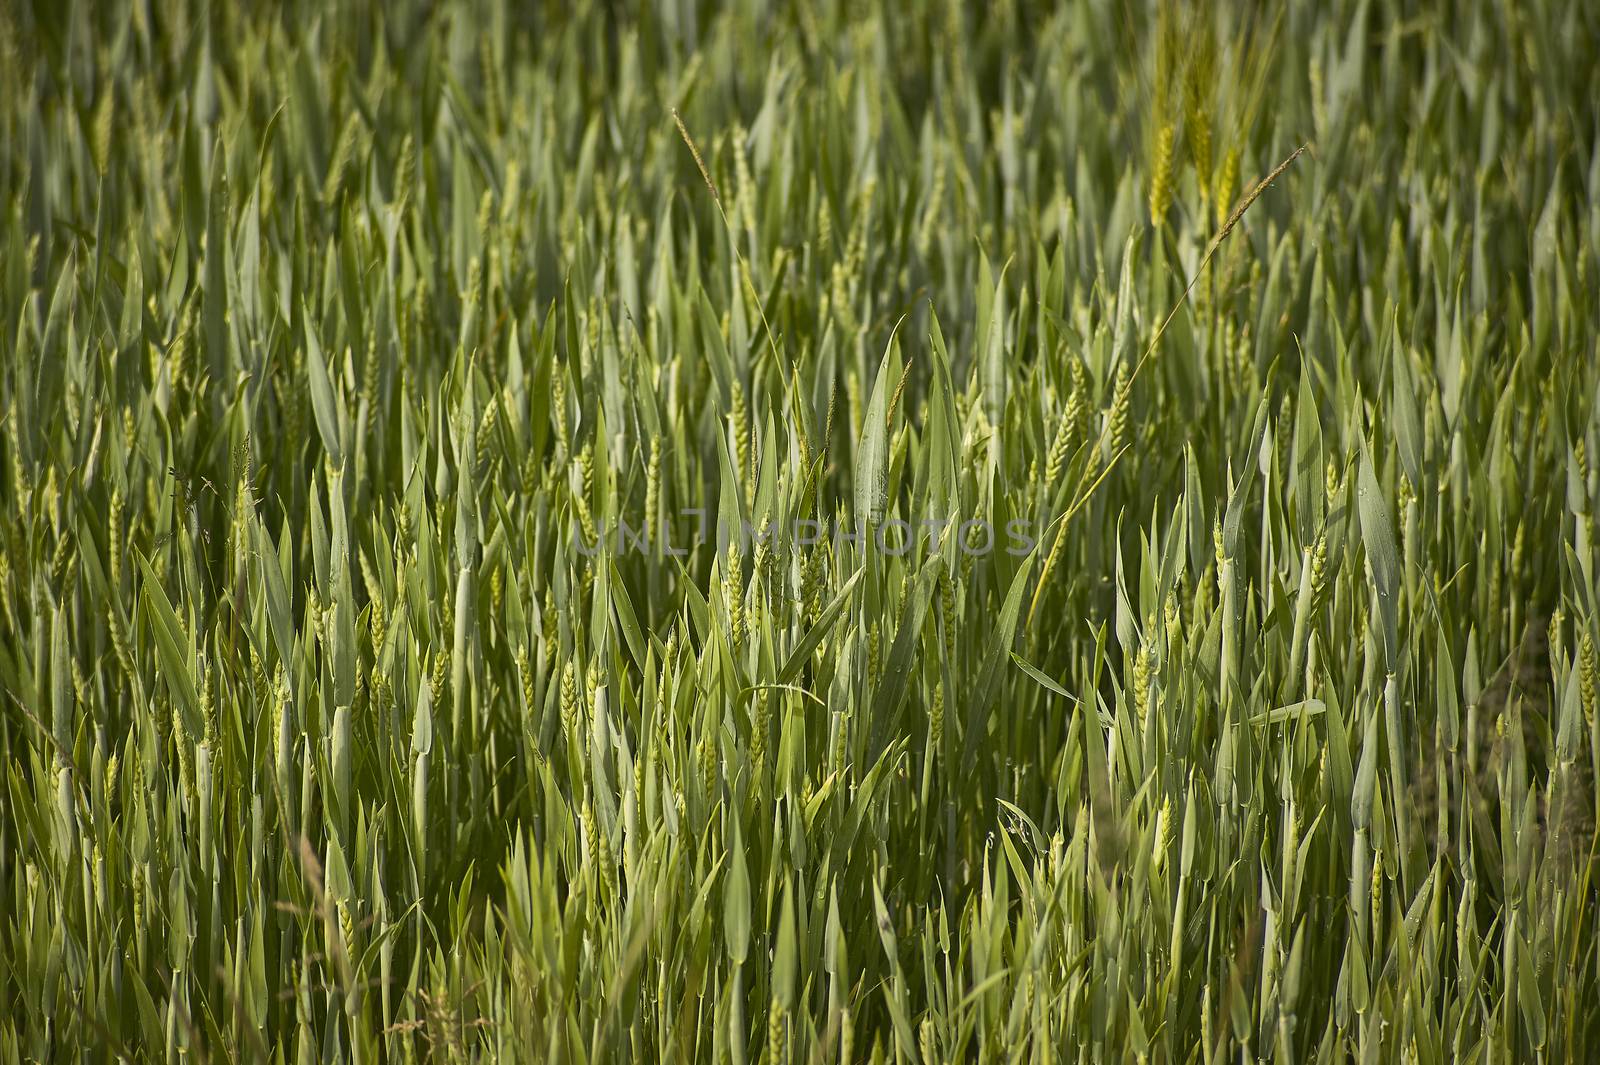 Ears of barley in a field of cultivation, agriculture in italy.